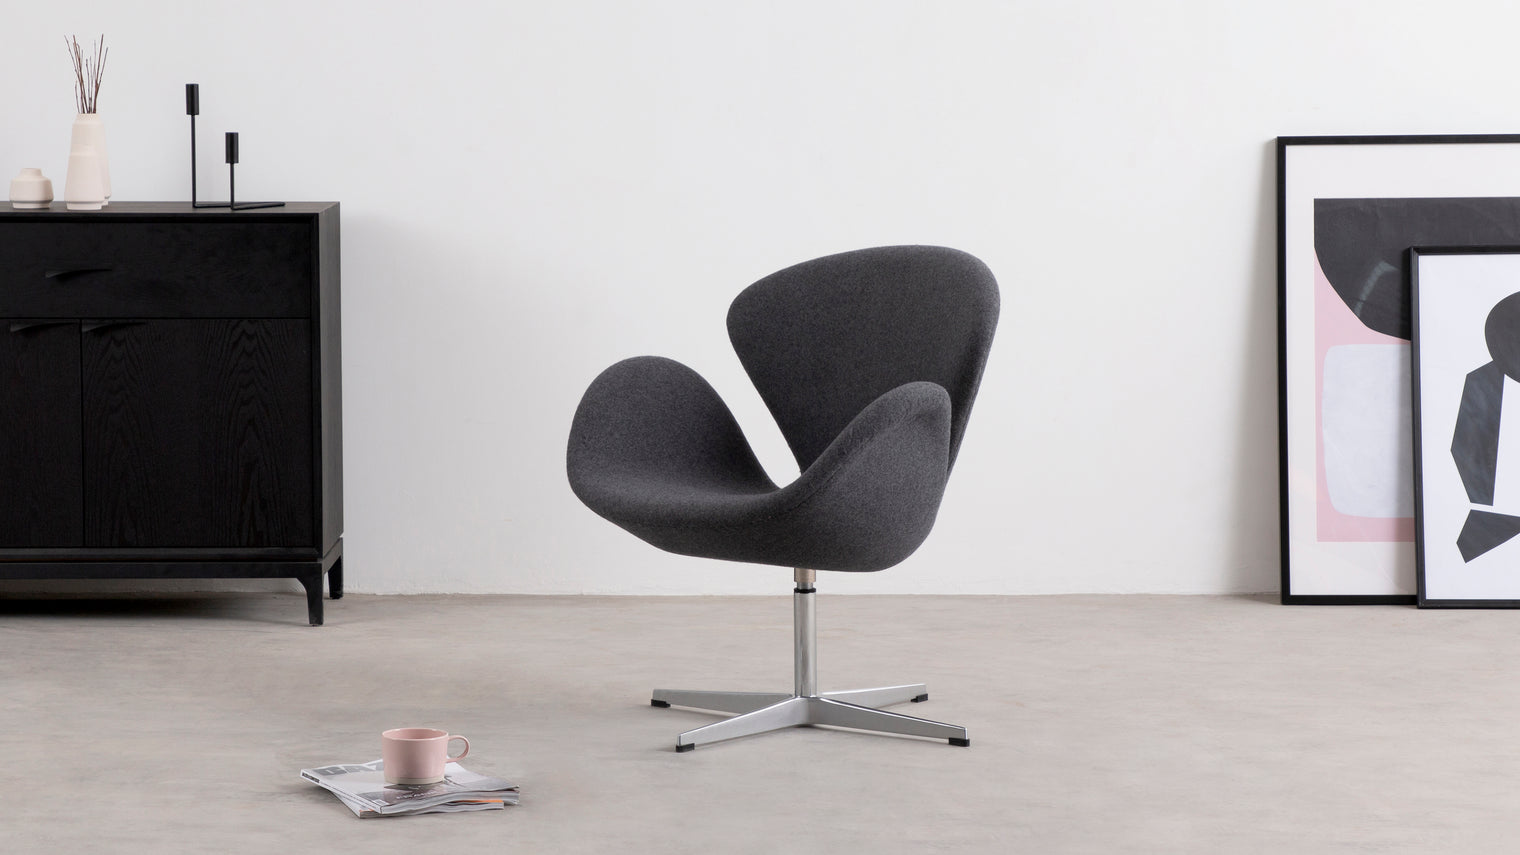 A Jacobsen classic|It seems Jacobsen’s mind for design never rested. Swann Chair is famous for its unmistakable shape and unique aesthetic.
